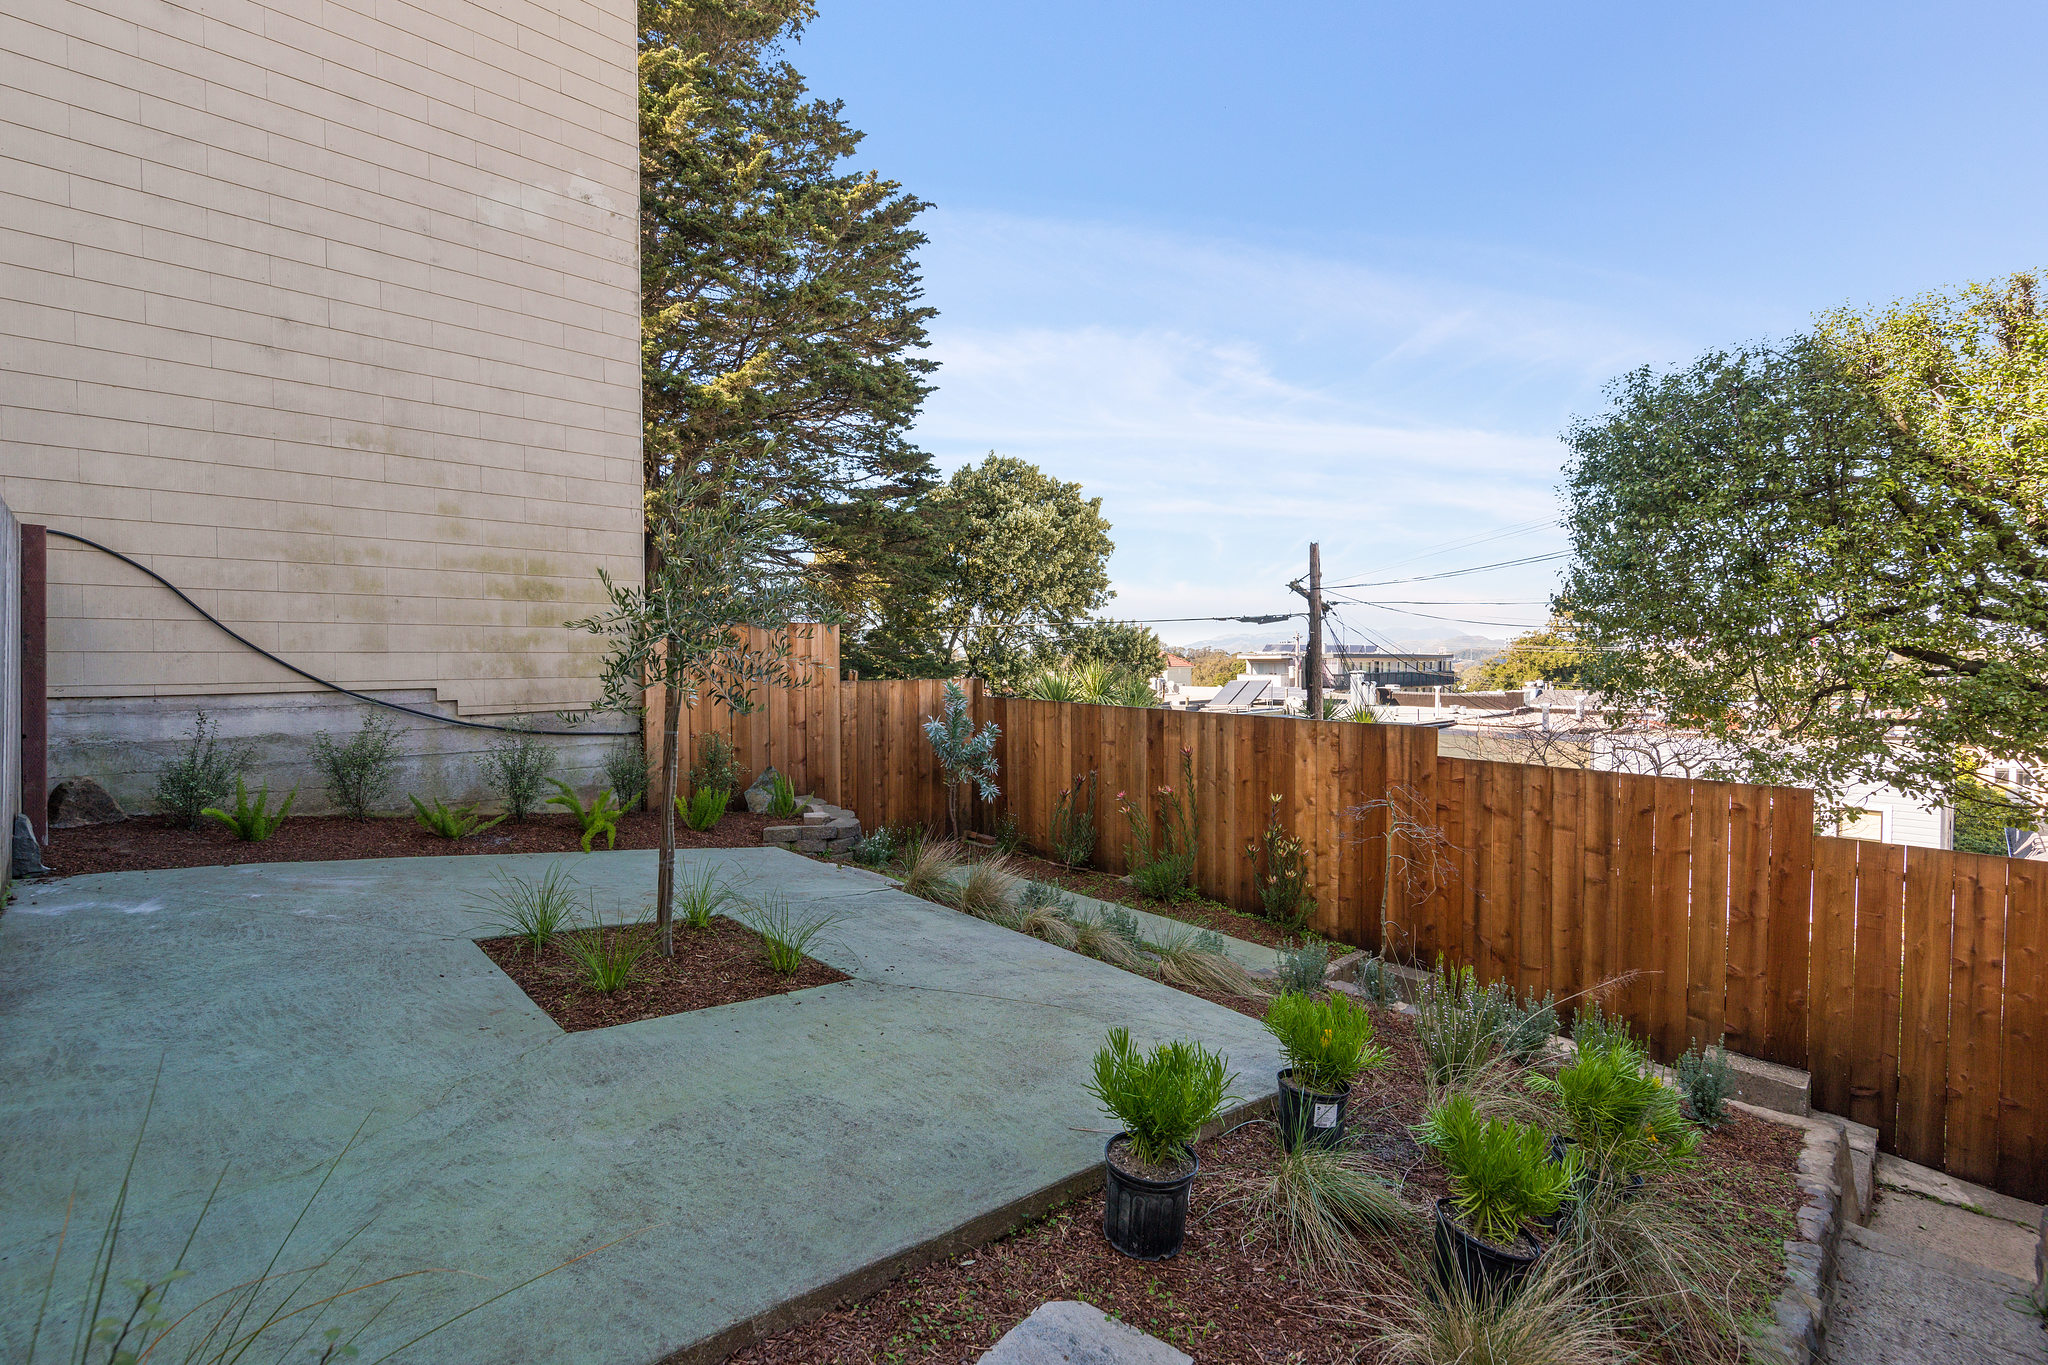 Property Photo: Exterior view of the outdoor space, featuring a wood fence